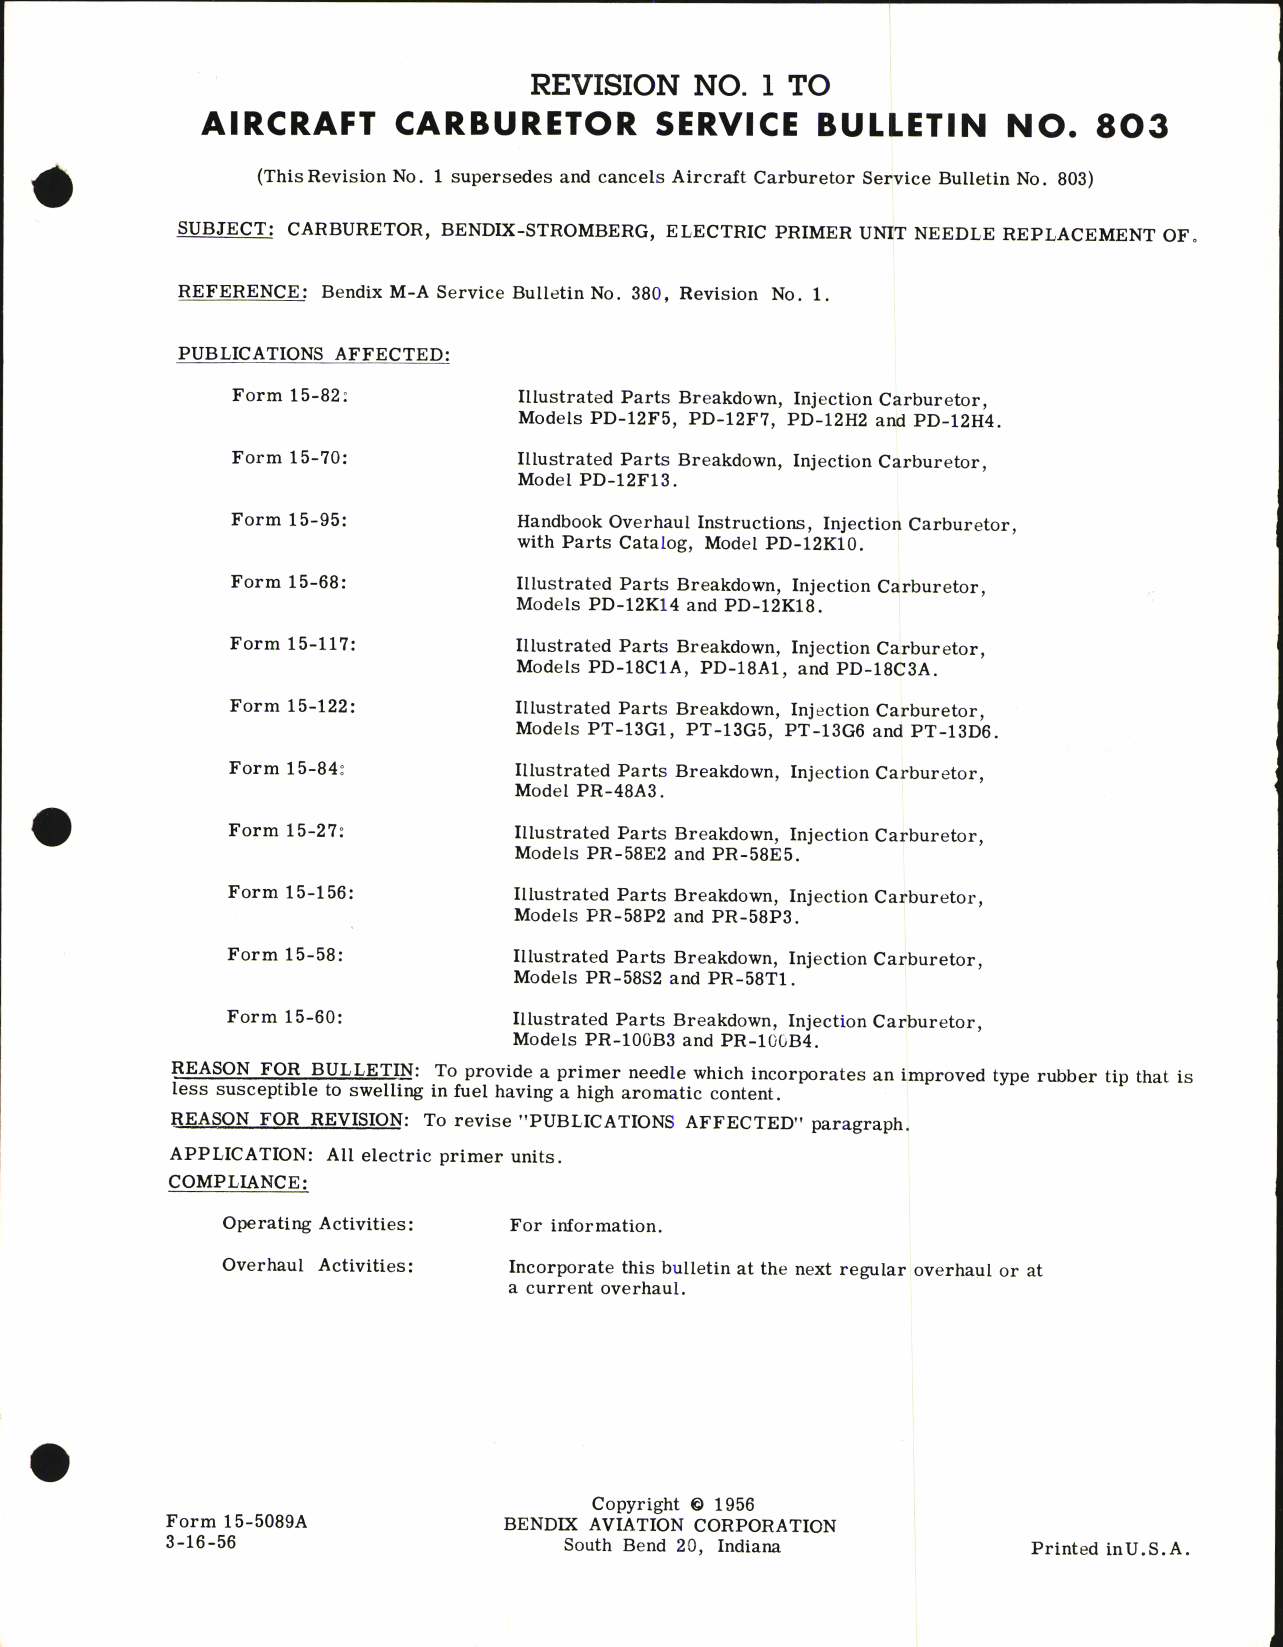 Sample page 1 from AirCorps Library document: Replacement of Electric Primer Unit Needle on Bendix-Stromberg Carburetor